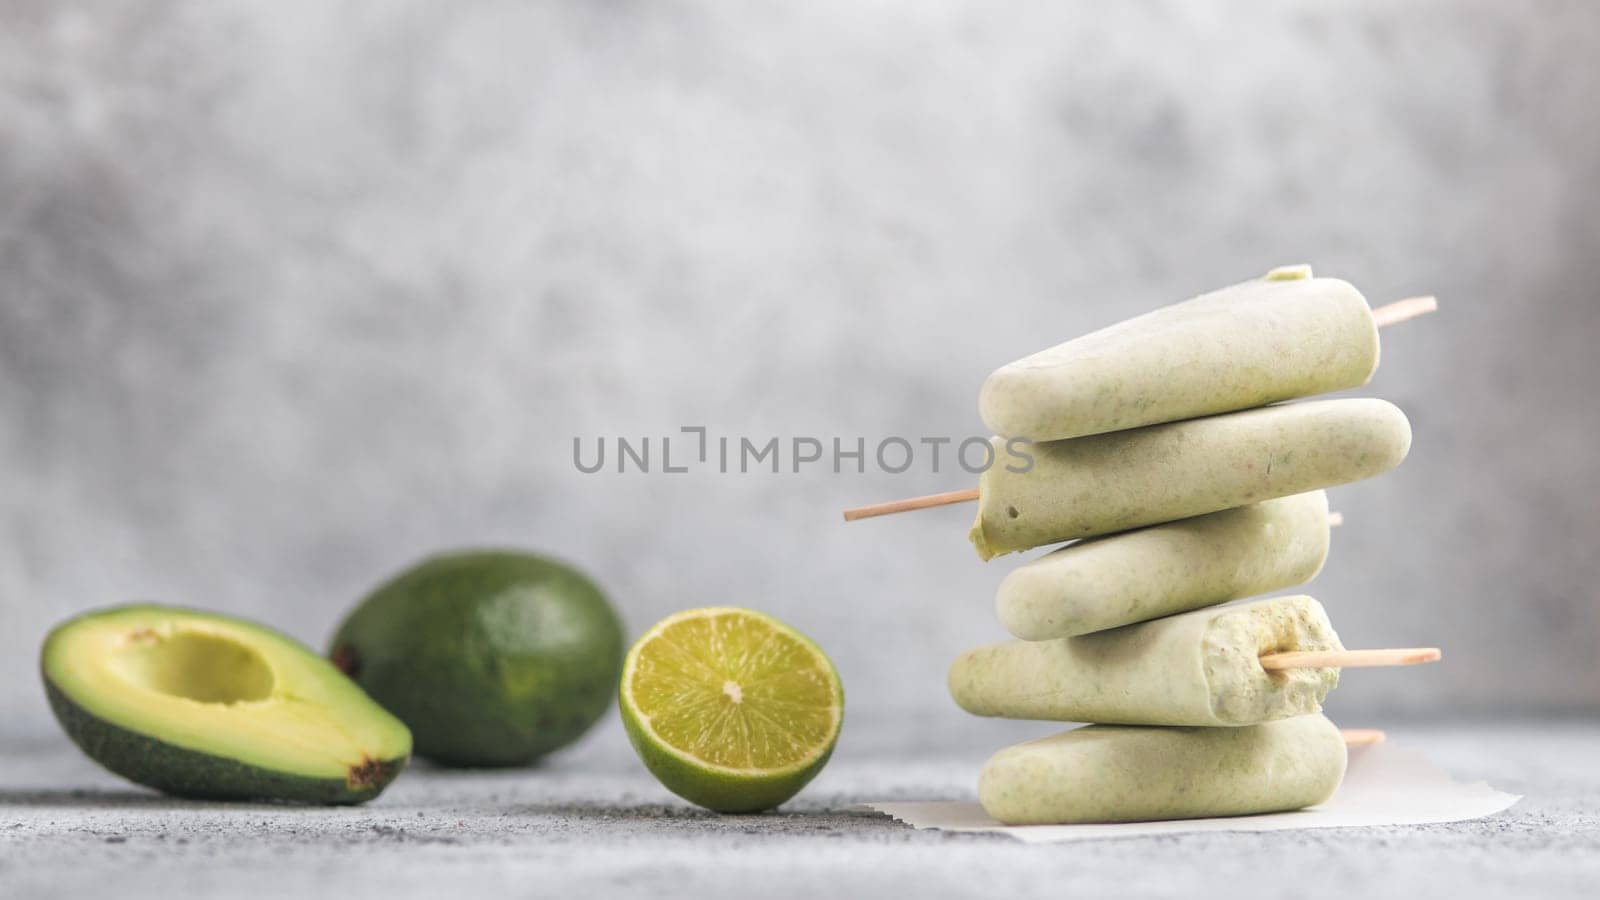 Homemade raw vegan avocado lime popsicle. Sugar-free, non-dairy green ice cream on gray cement textured background. Copy space. Ideas and recipes for healthy snack, dessert or smoothie. Banner